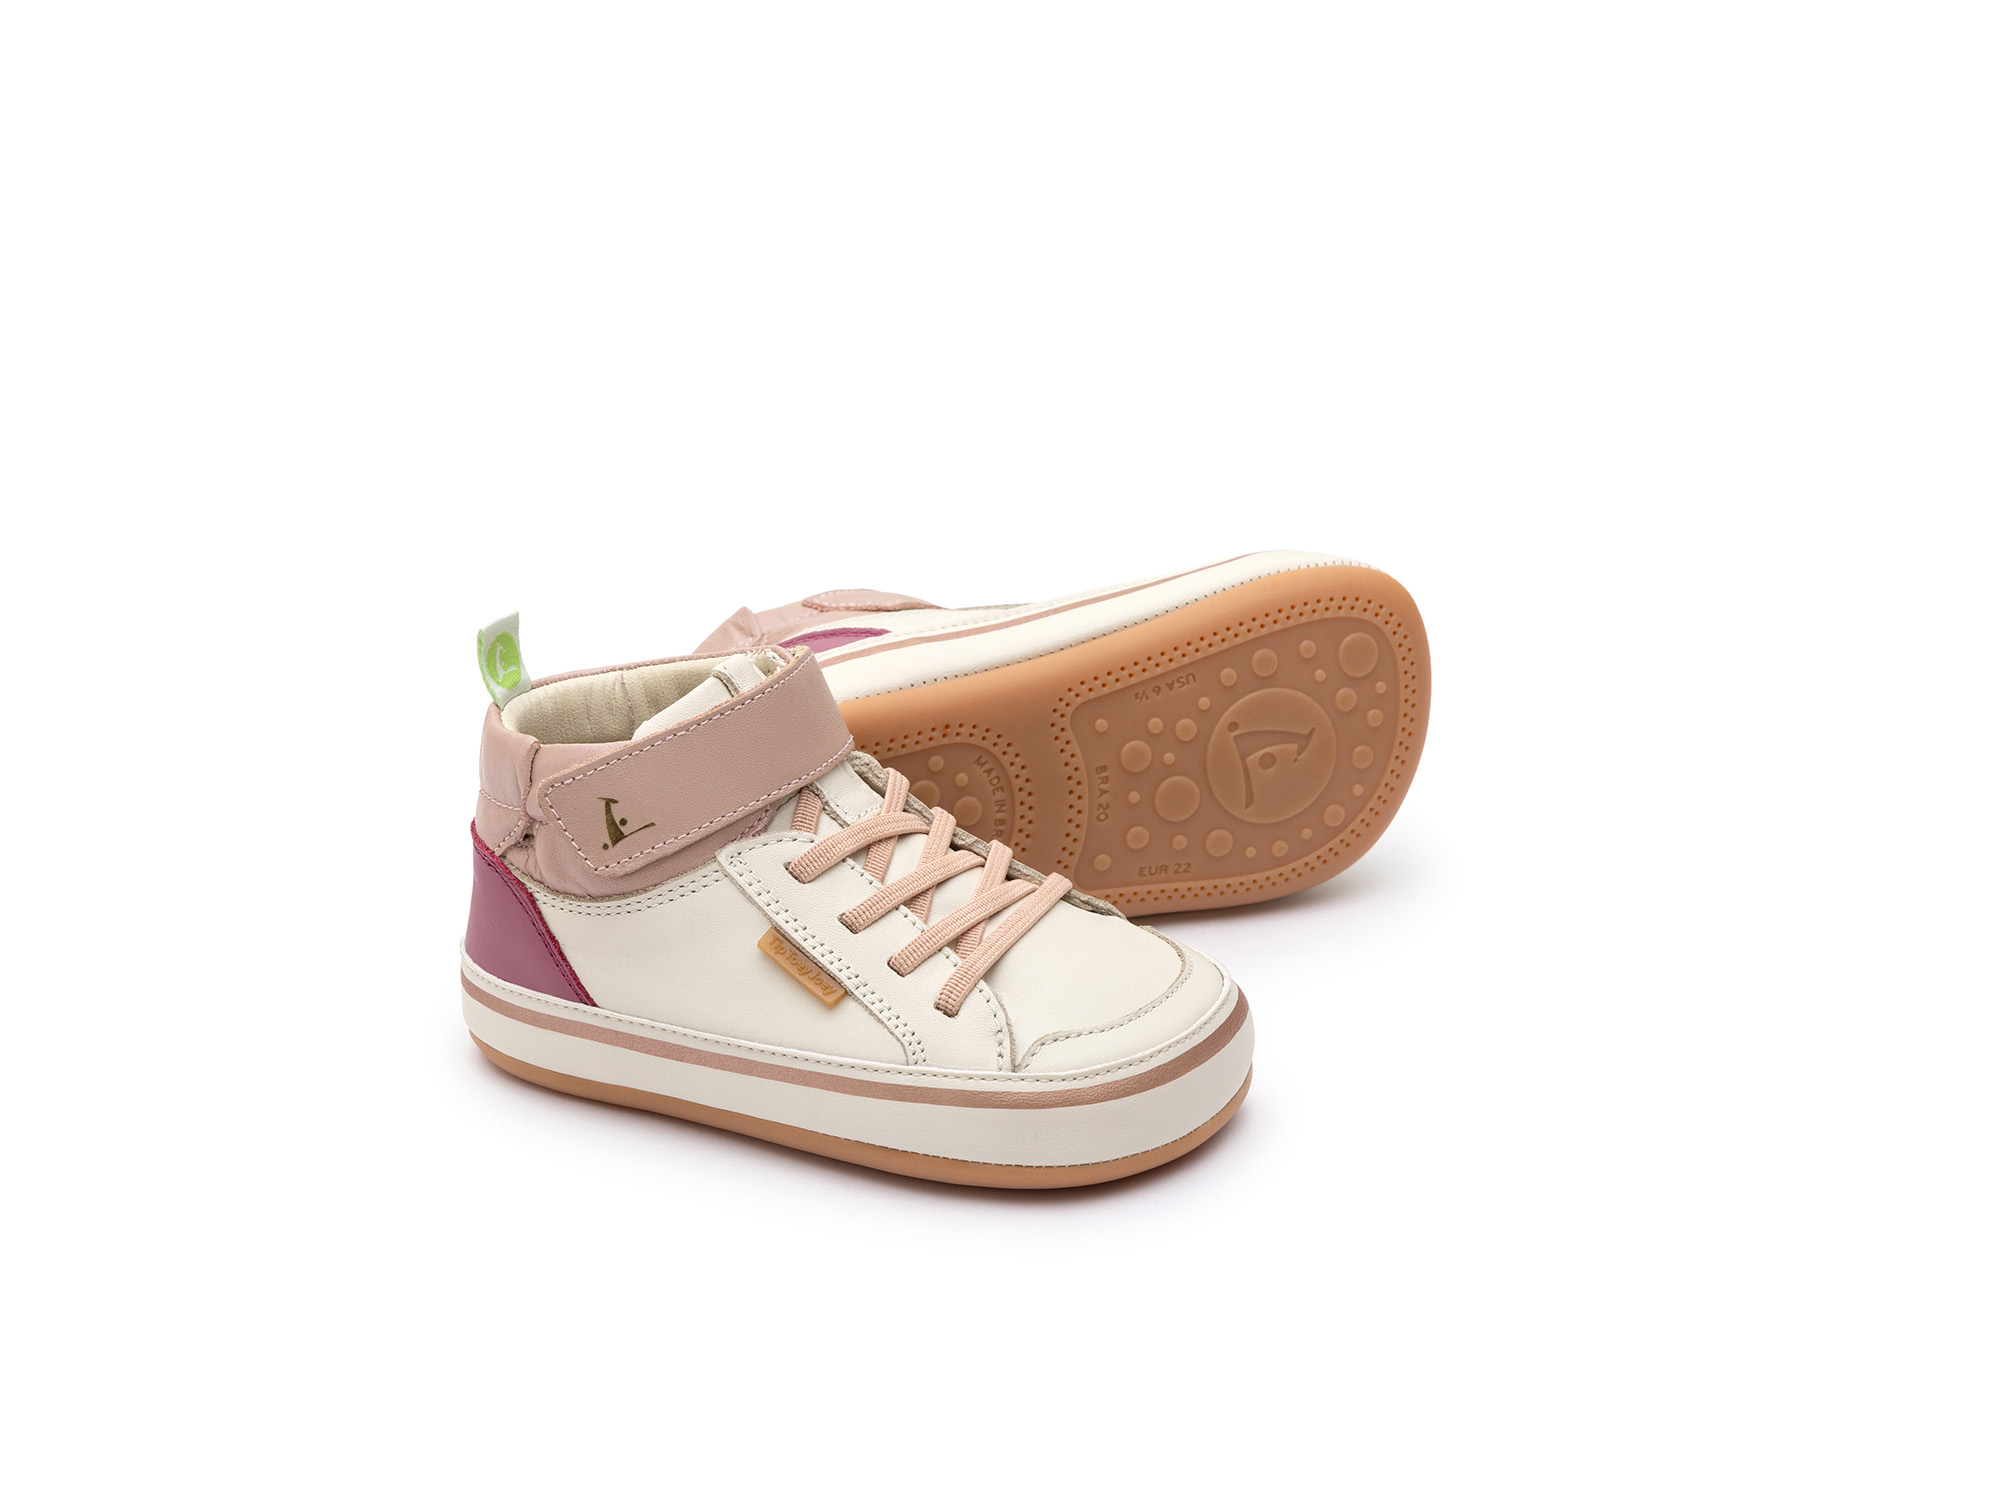 UP & GO Sneakers for Girls Alley | Tip Toey Joey - Australia - 0